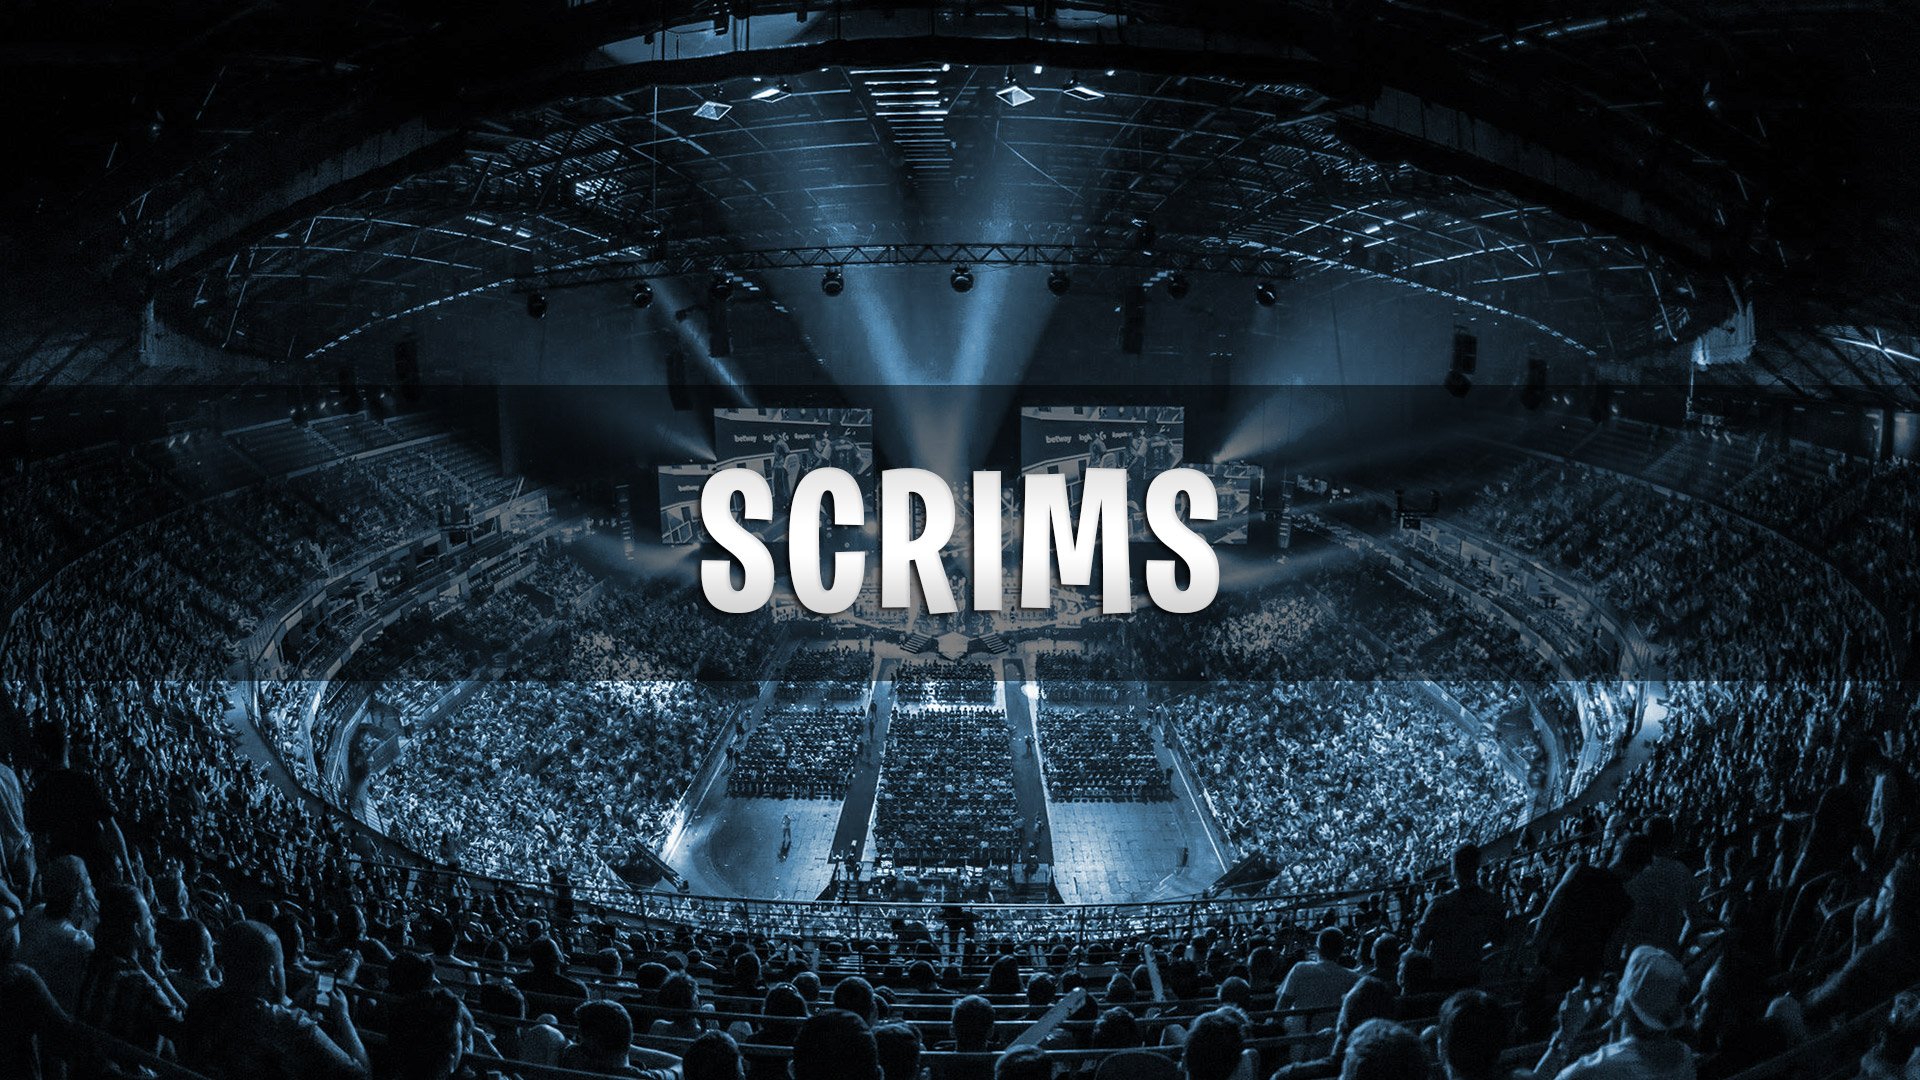 Scrims Pro Scrims What Is It And How To Join Scrims Yogaming Com - clan tfue will often do scrims against other players and teams in this article we will explain what a scrim and pro scrim is and how you can do